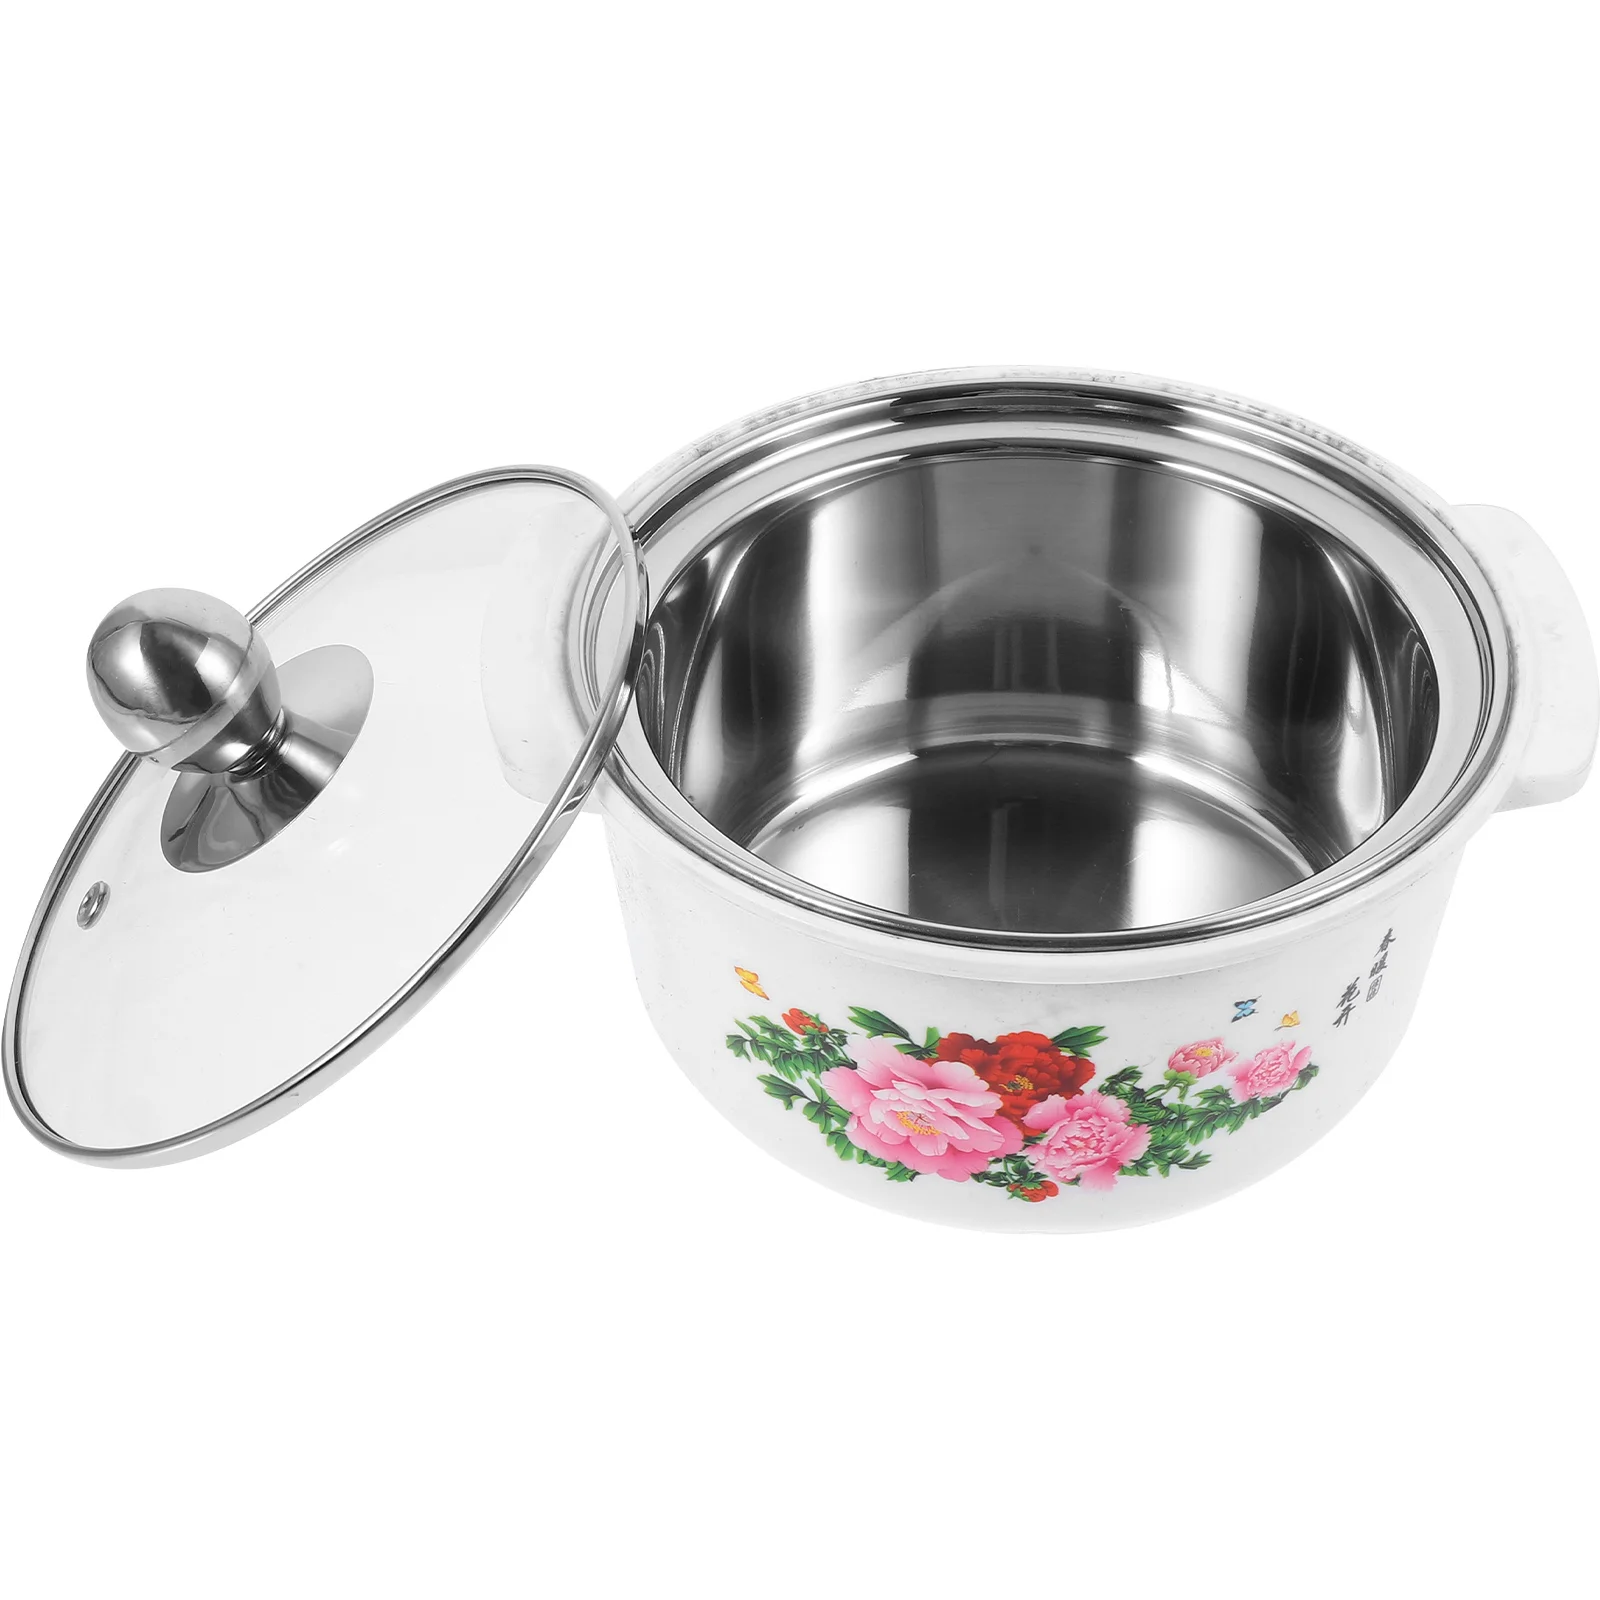 

Stew Pots Lids Soup With Cover Small For Cooking Peony Sauce Pans Pasta Stove Stainless Steel Top Hotpot